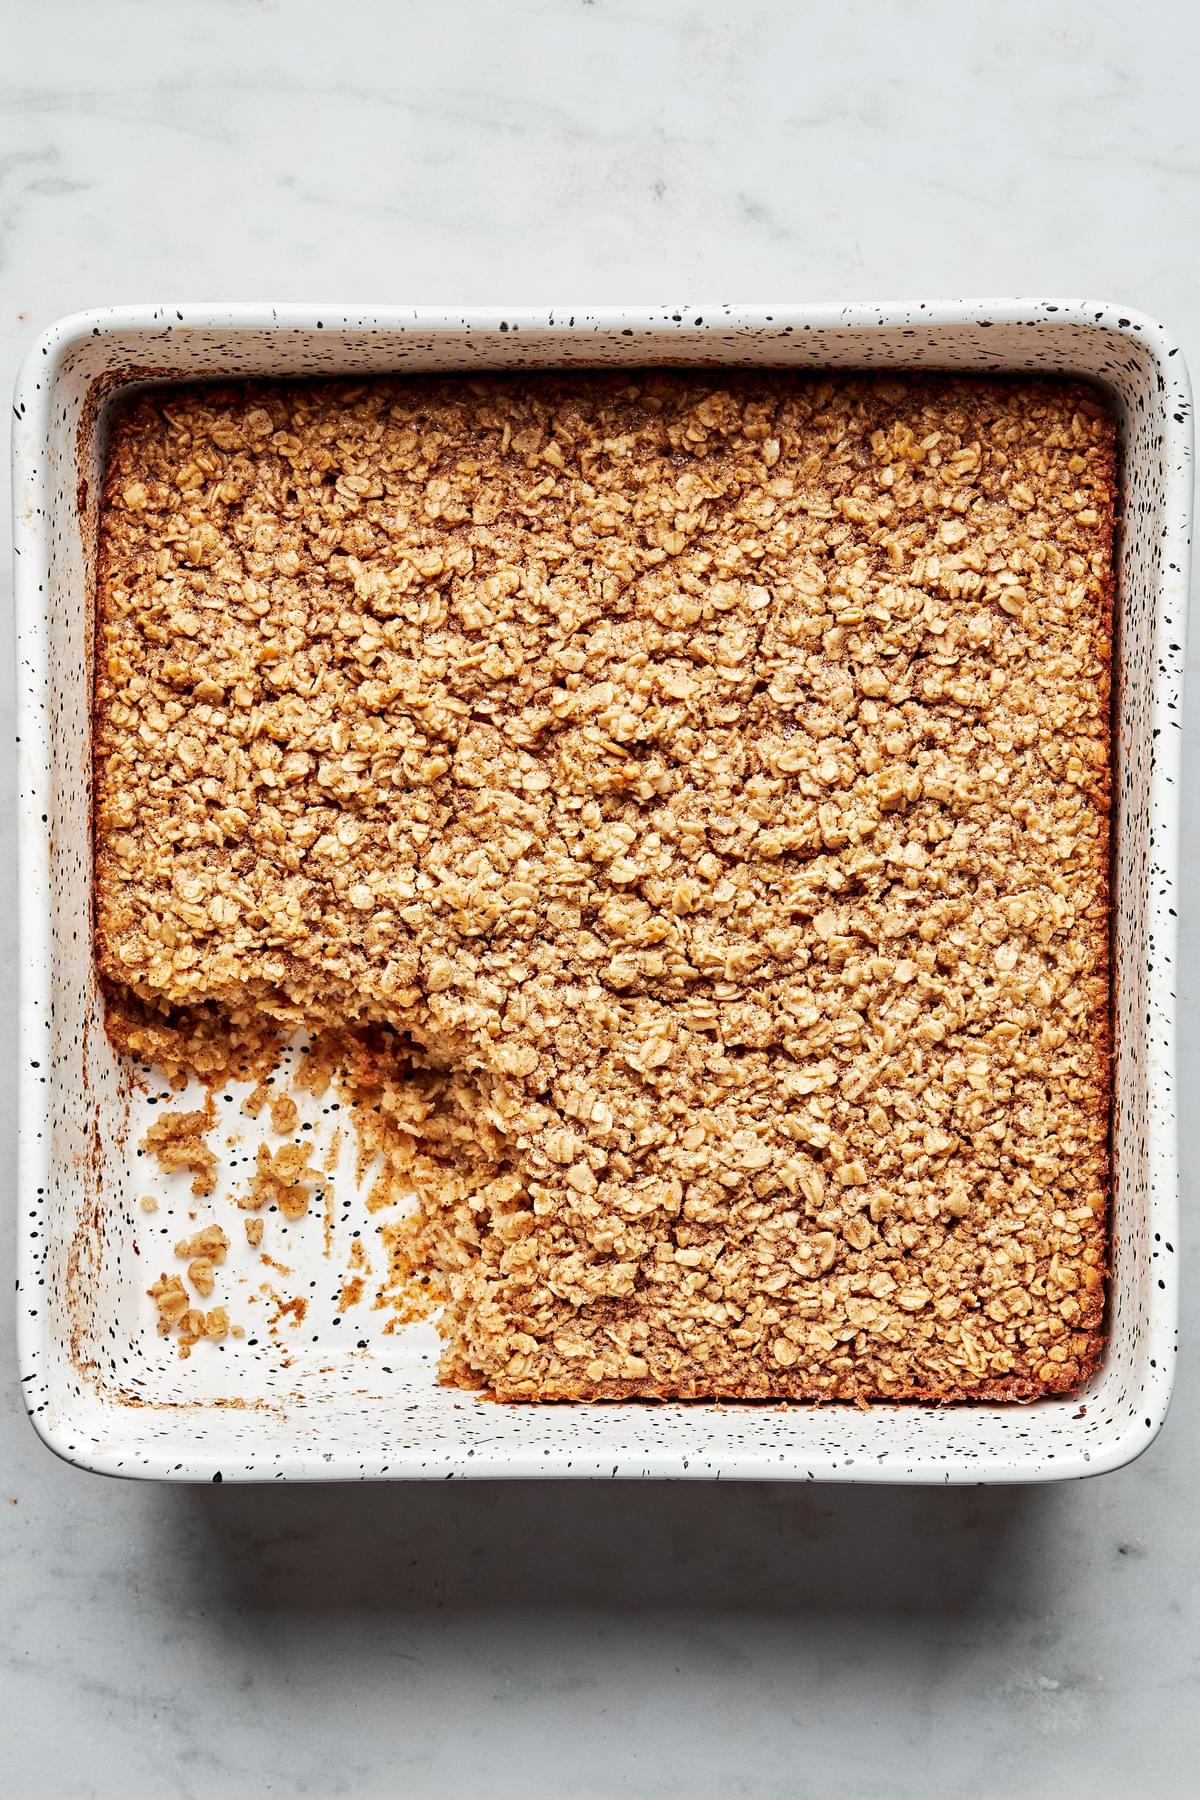 baked oatmeal in a 9x9 baking with a slice cut out, made with oats, eggs, milk, maple syrup, vanilla, butter and spices